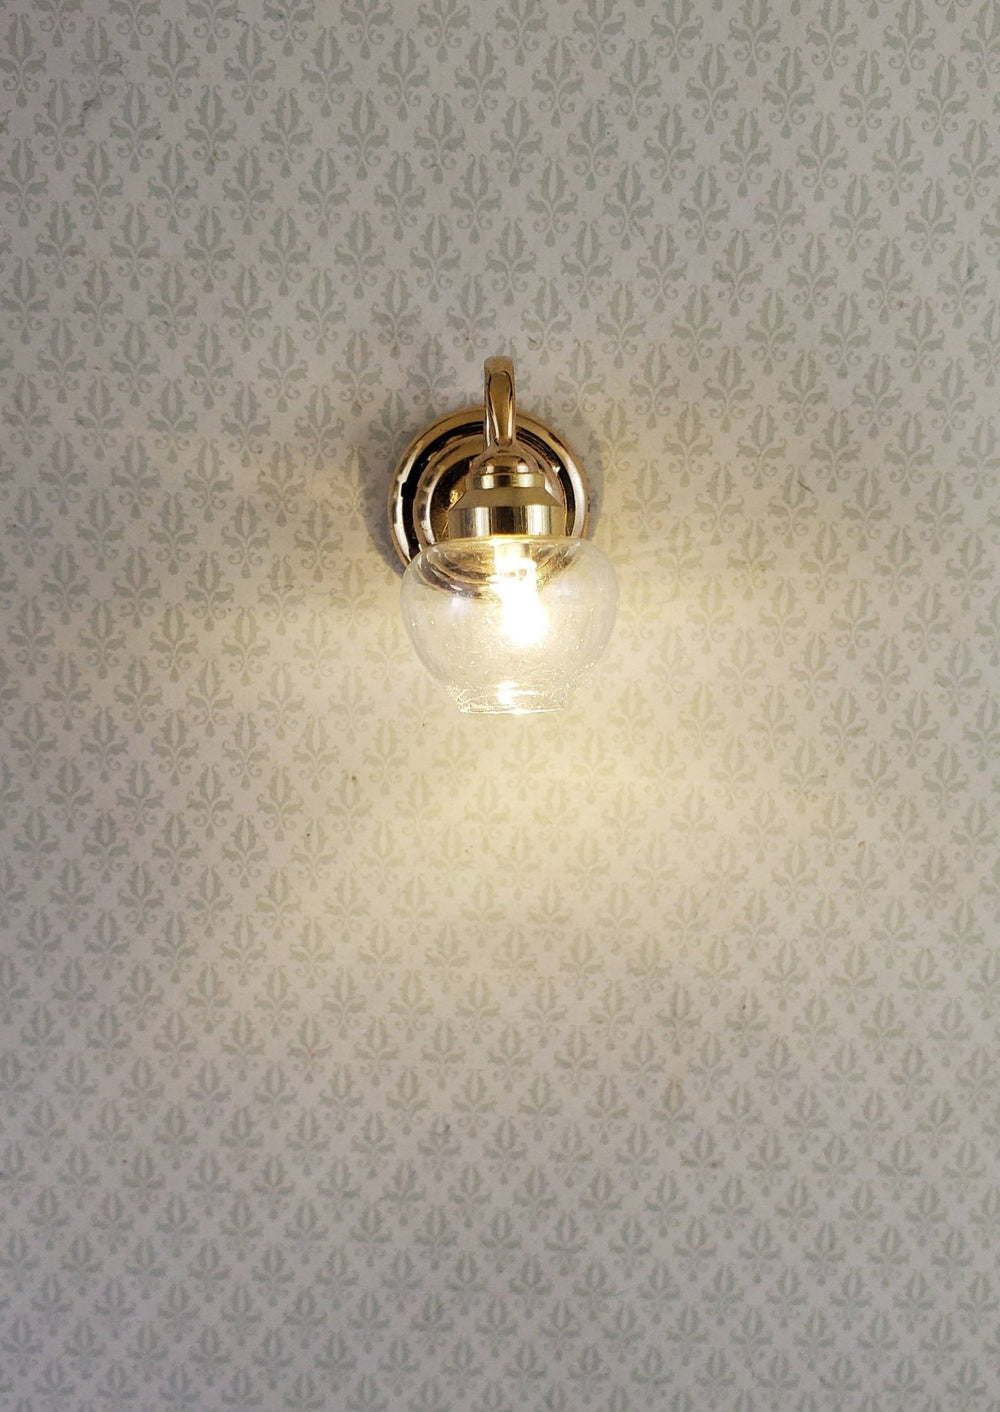 Dollhouse Battery Light LARGE Wall Sconce Clear Shade 1:12 Scale Miniature - Miniature Crush